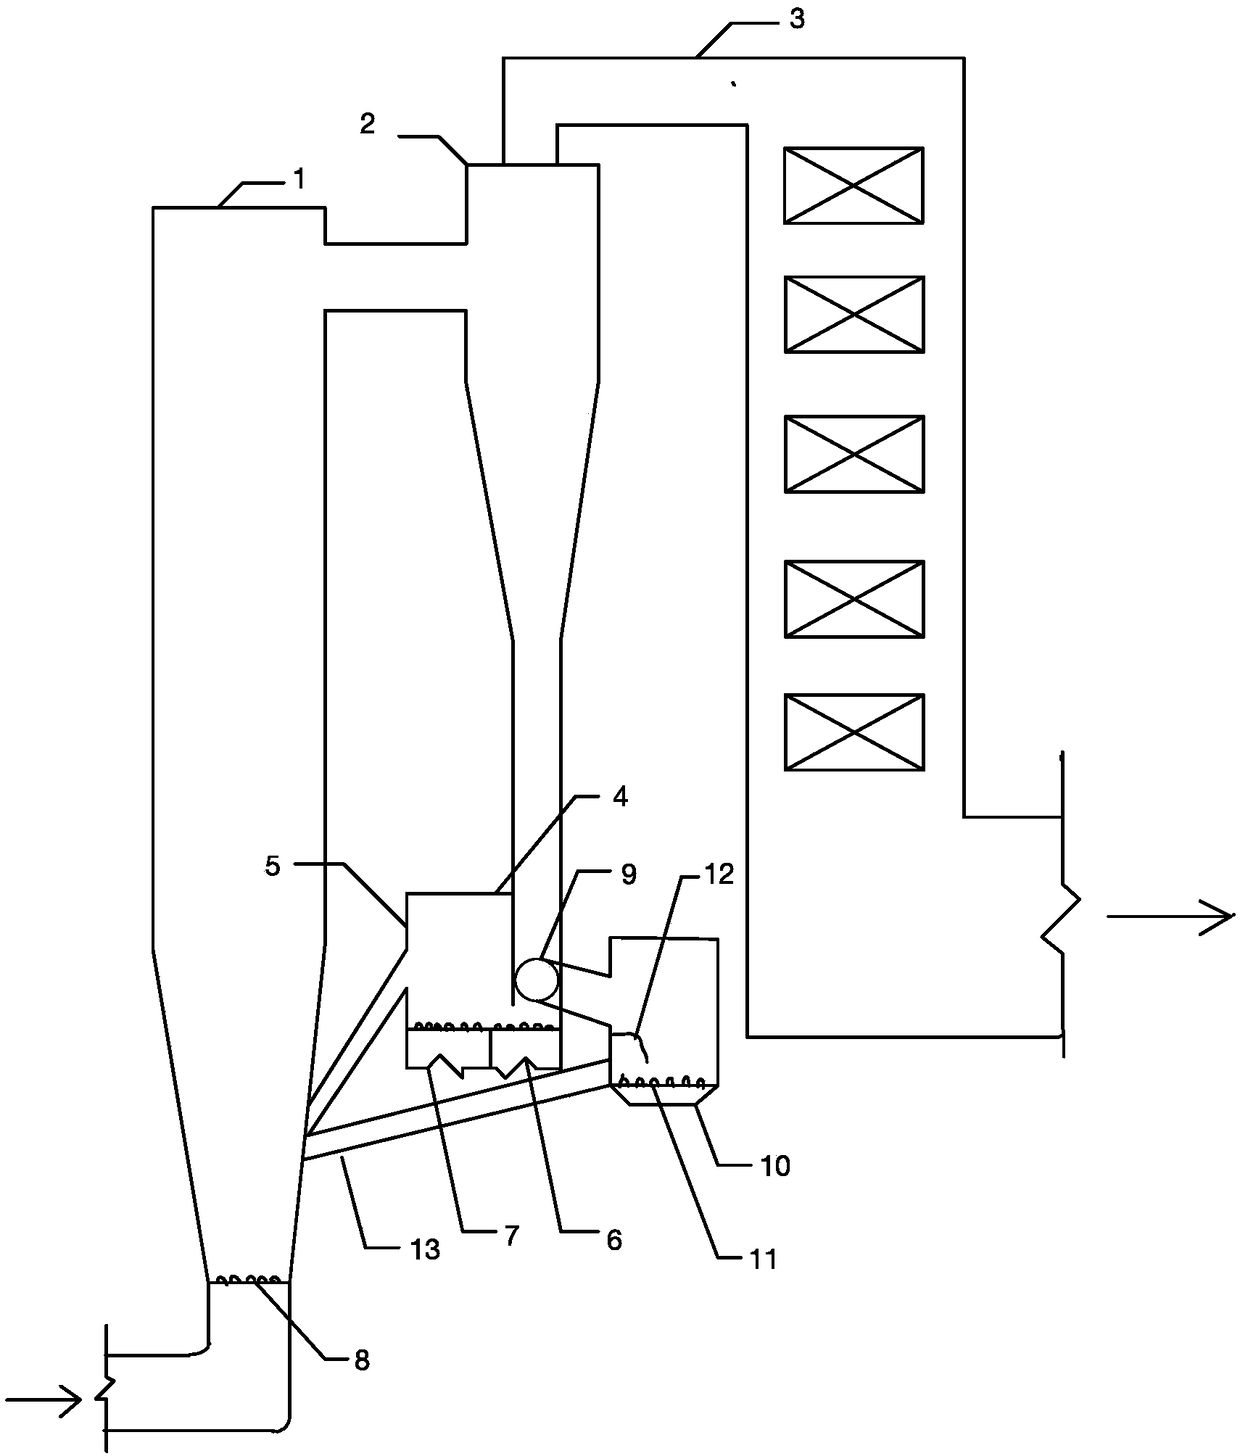 Rapid variable-load circulating fluidized bed boiler